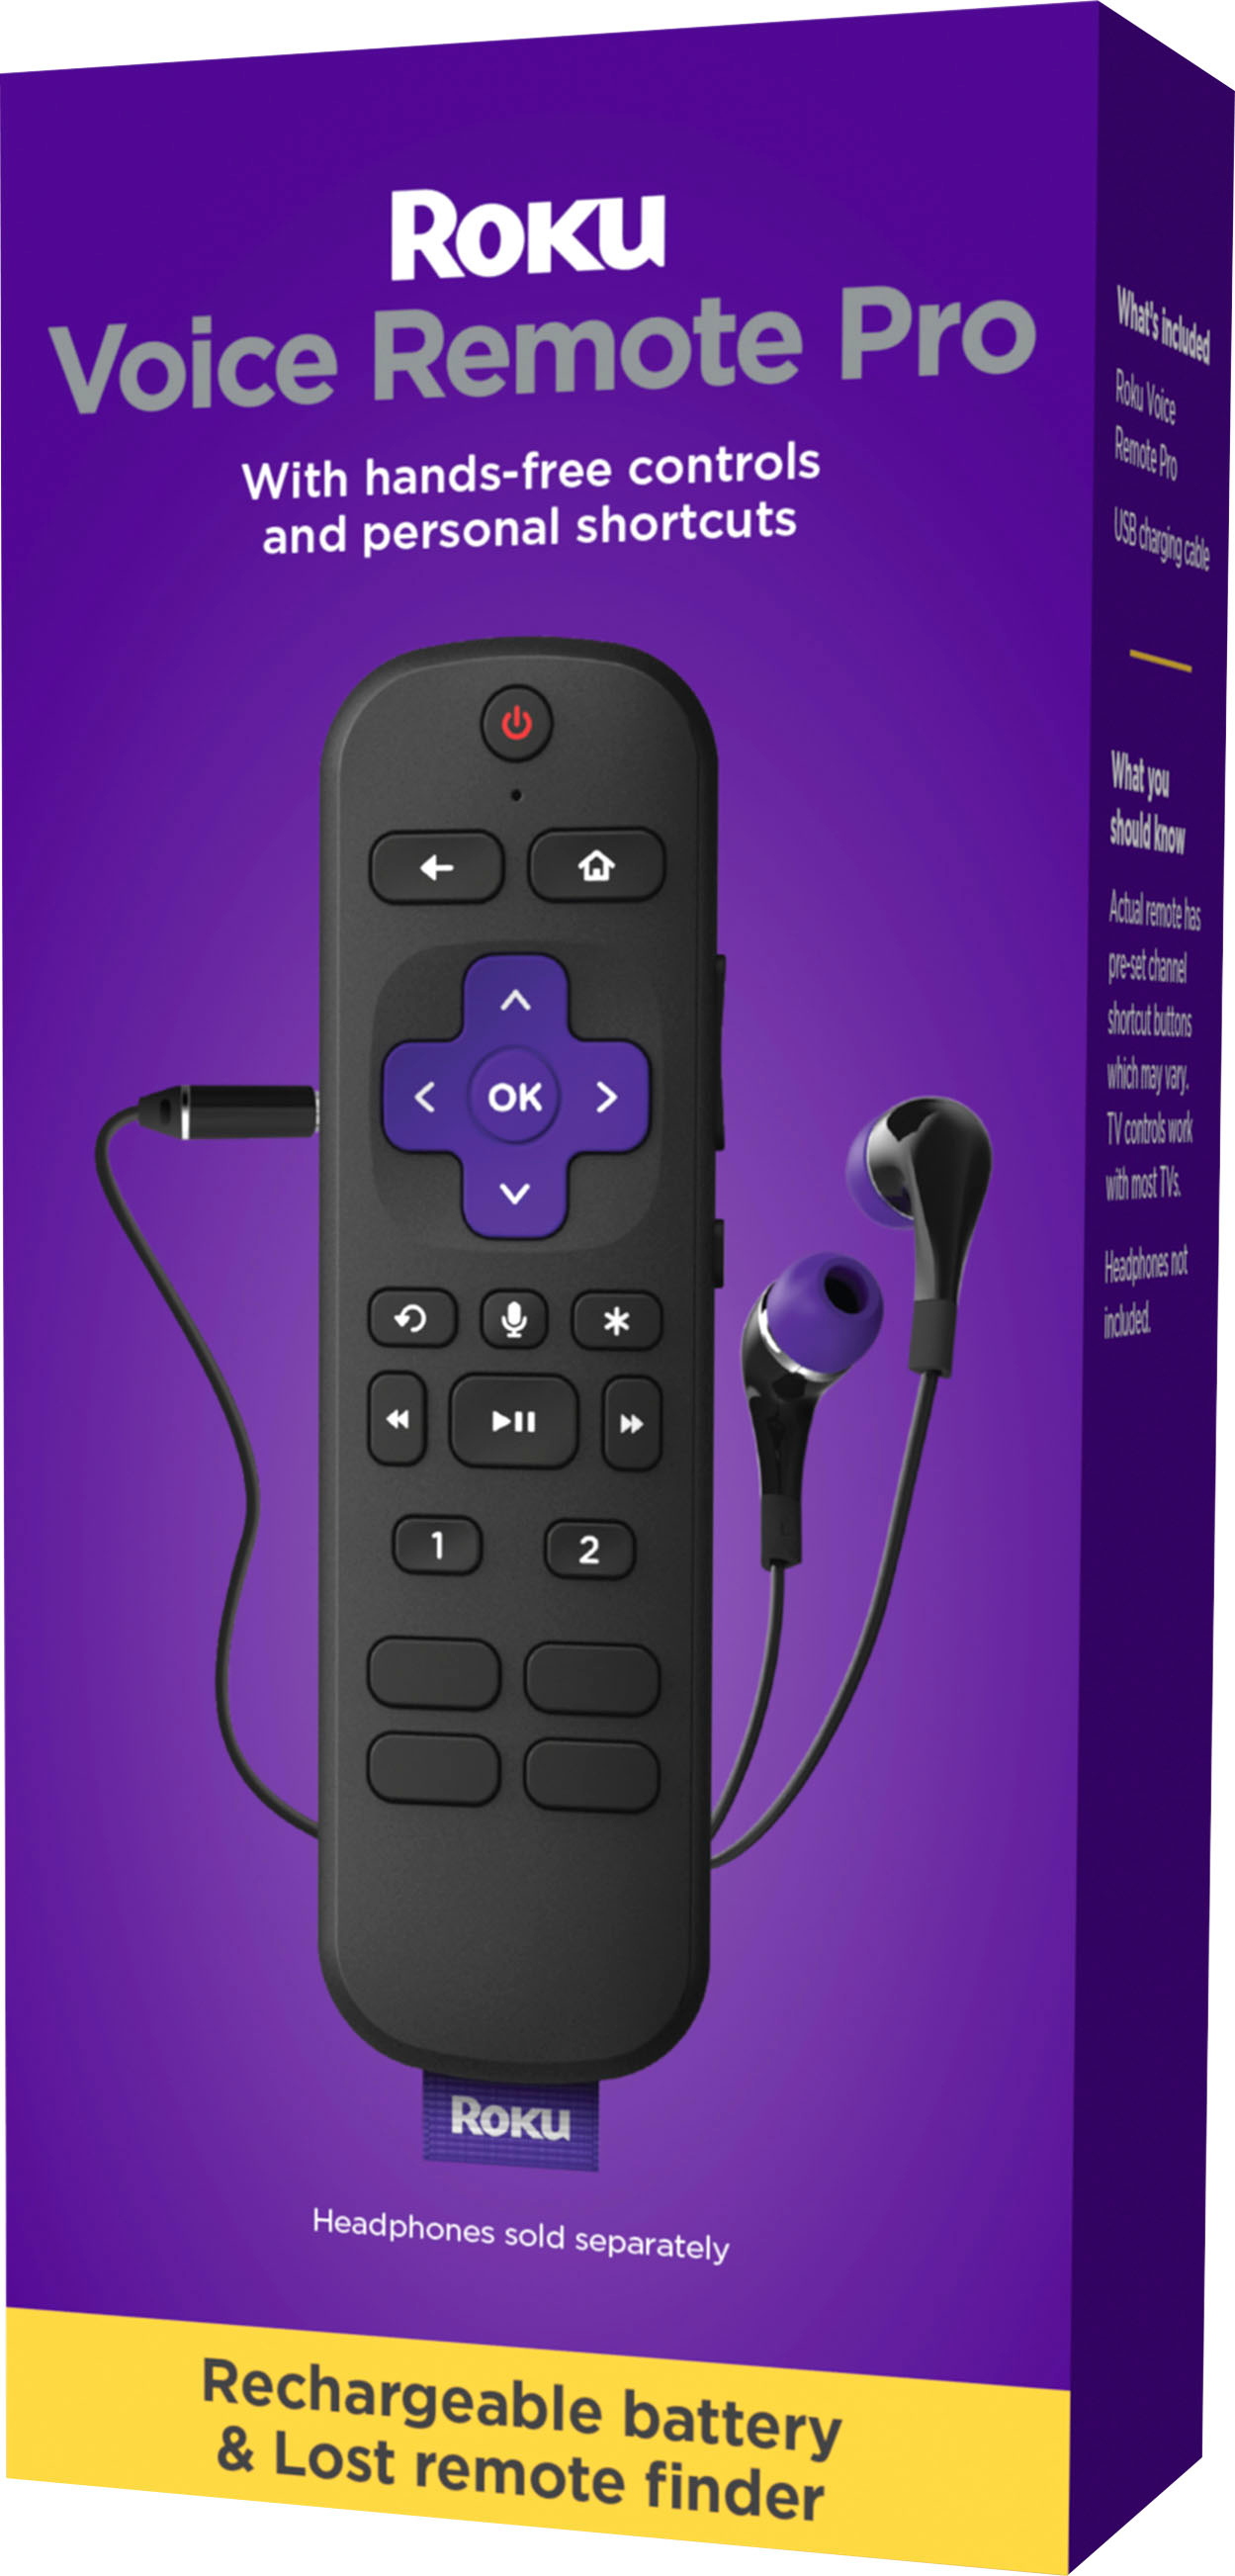 What is Roku TV and How Does a Roku TV Work?